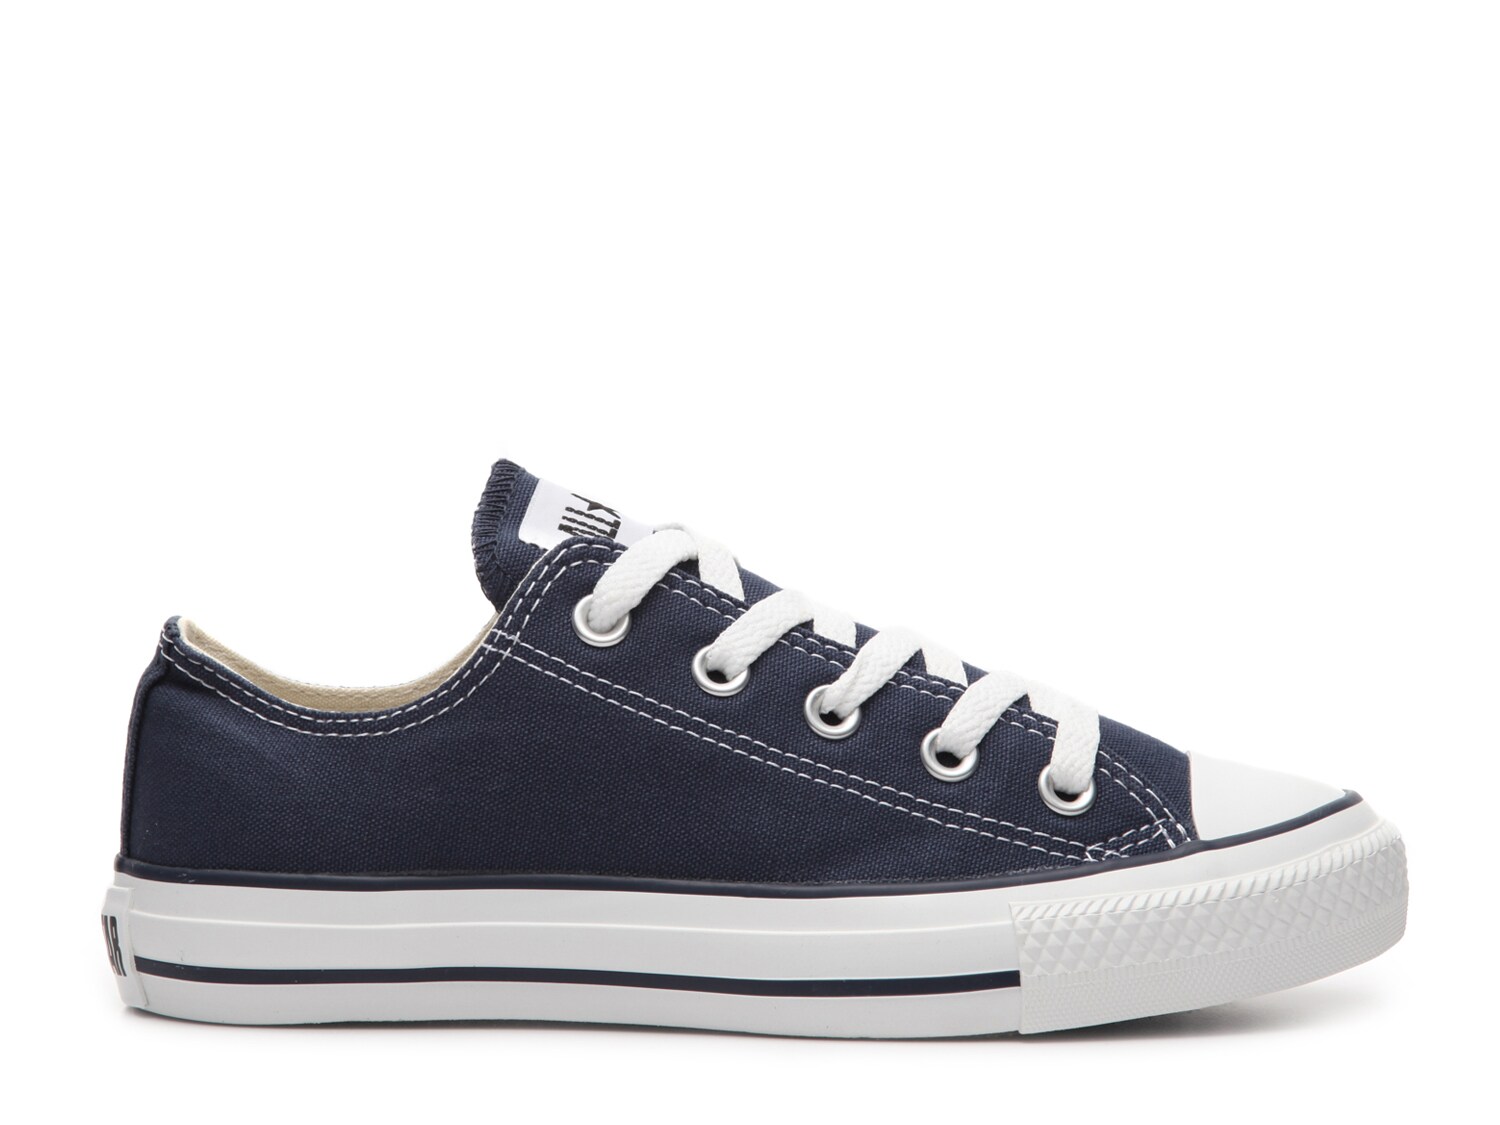 navy leather converse womens